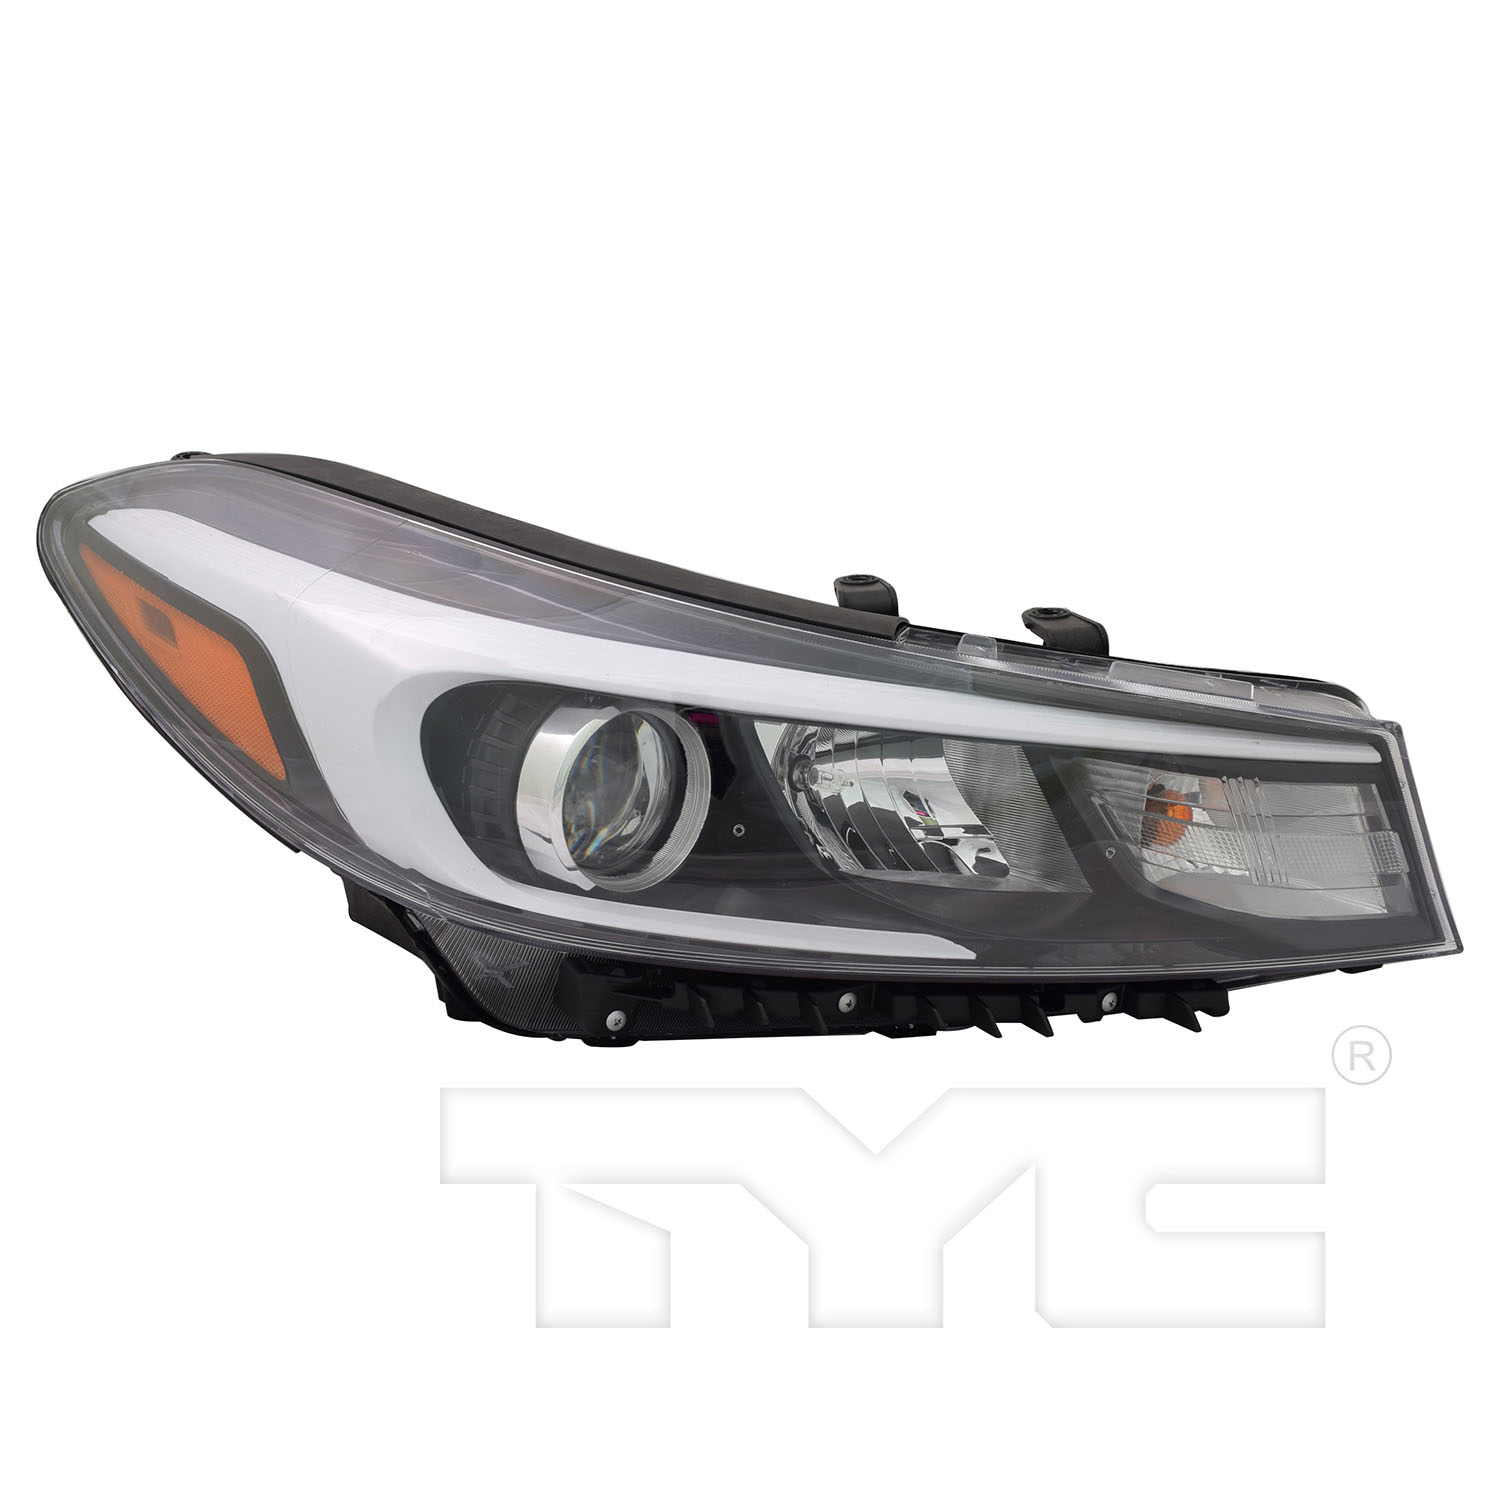 Aftermarket HEADLIGHTS for KIA - FORTE5, FORTE5,17-18,RT Headlamp assy composite